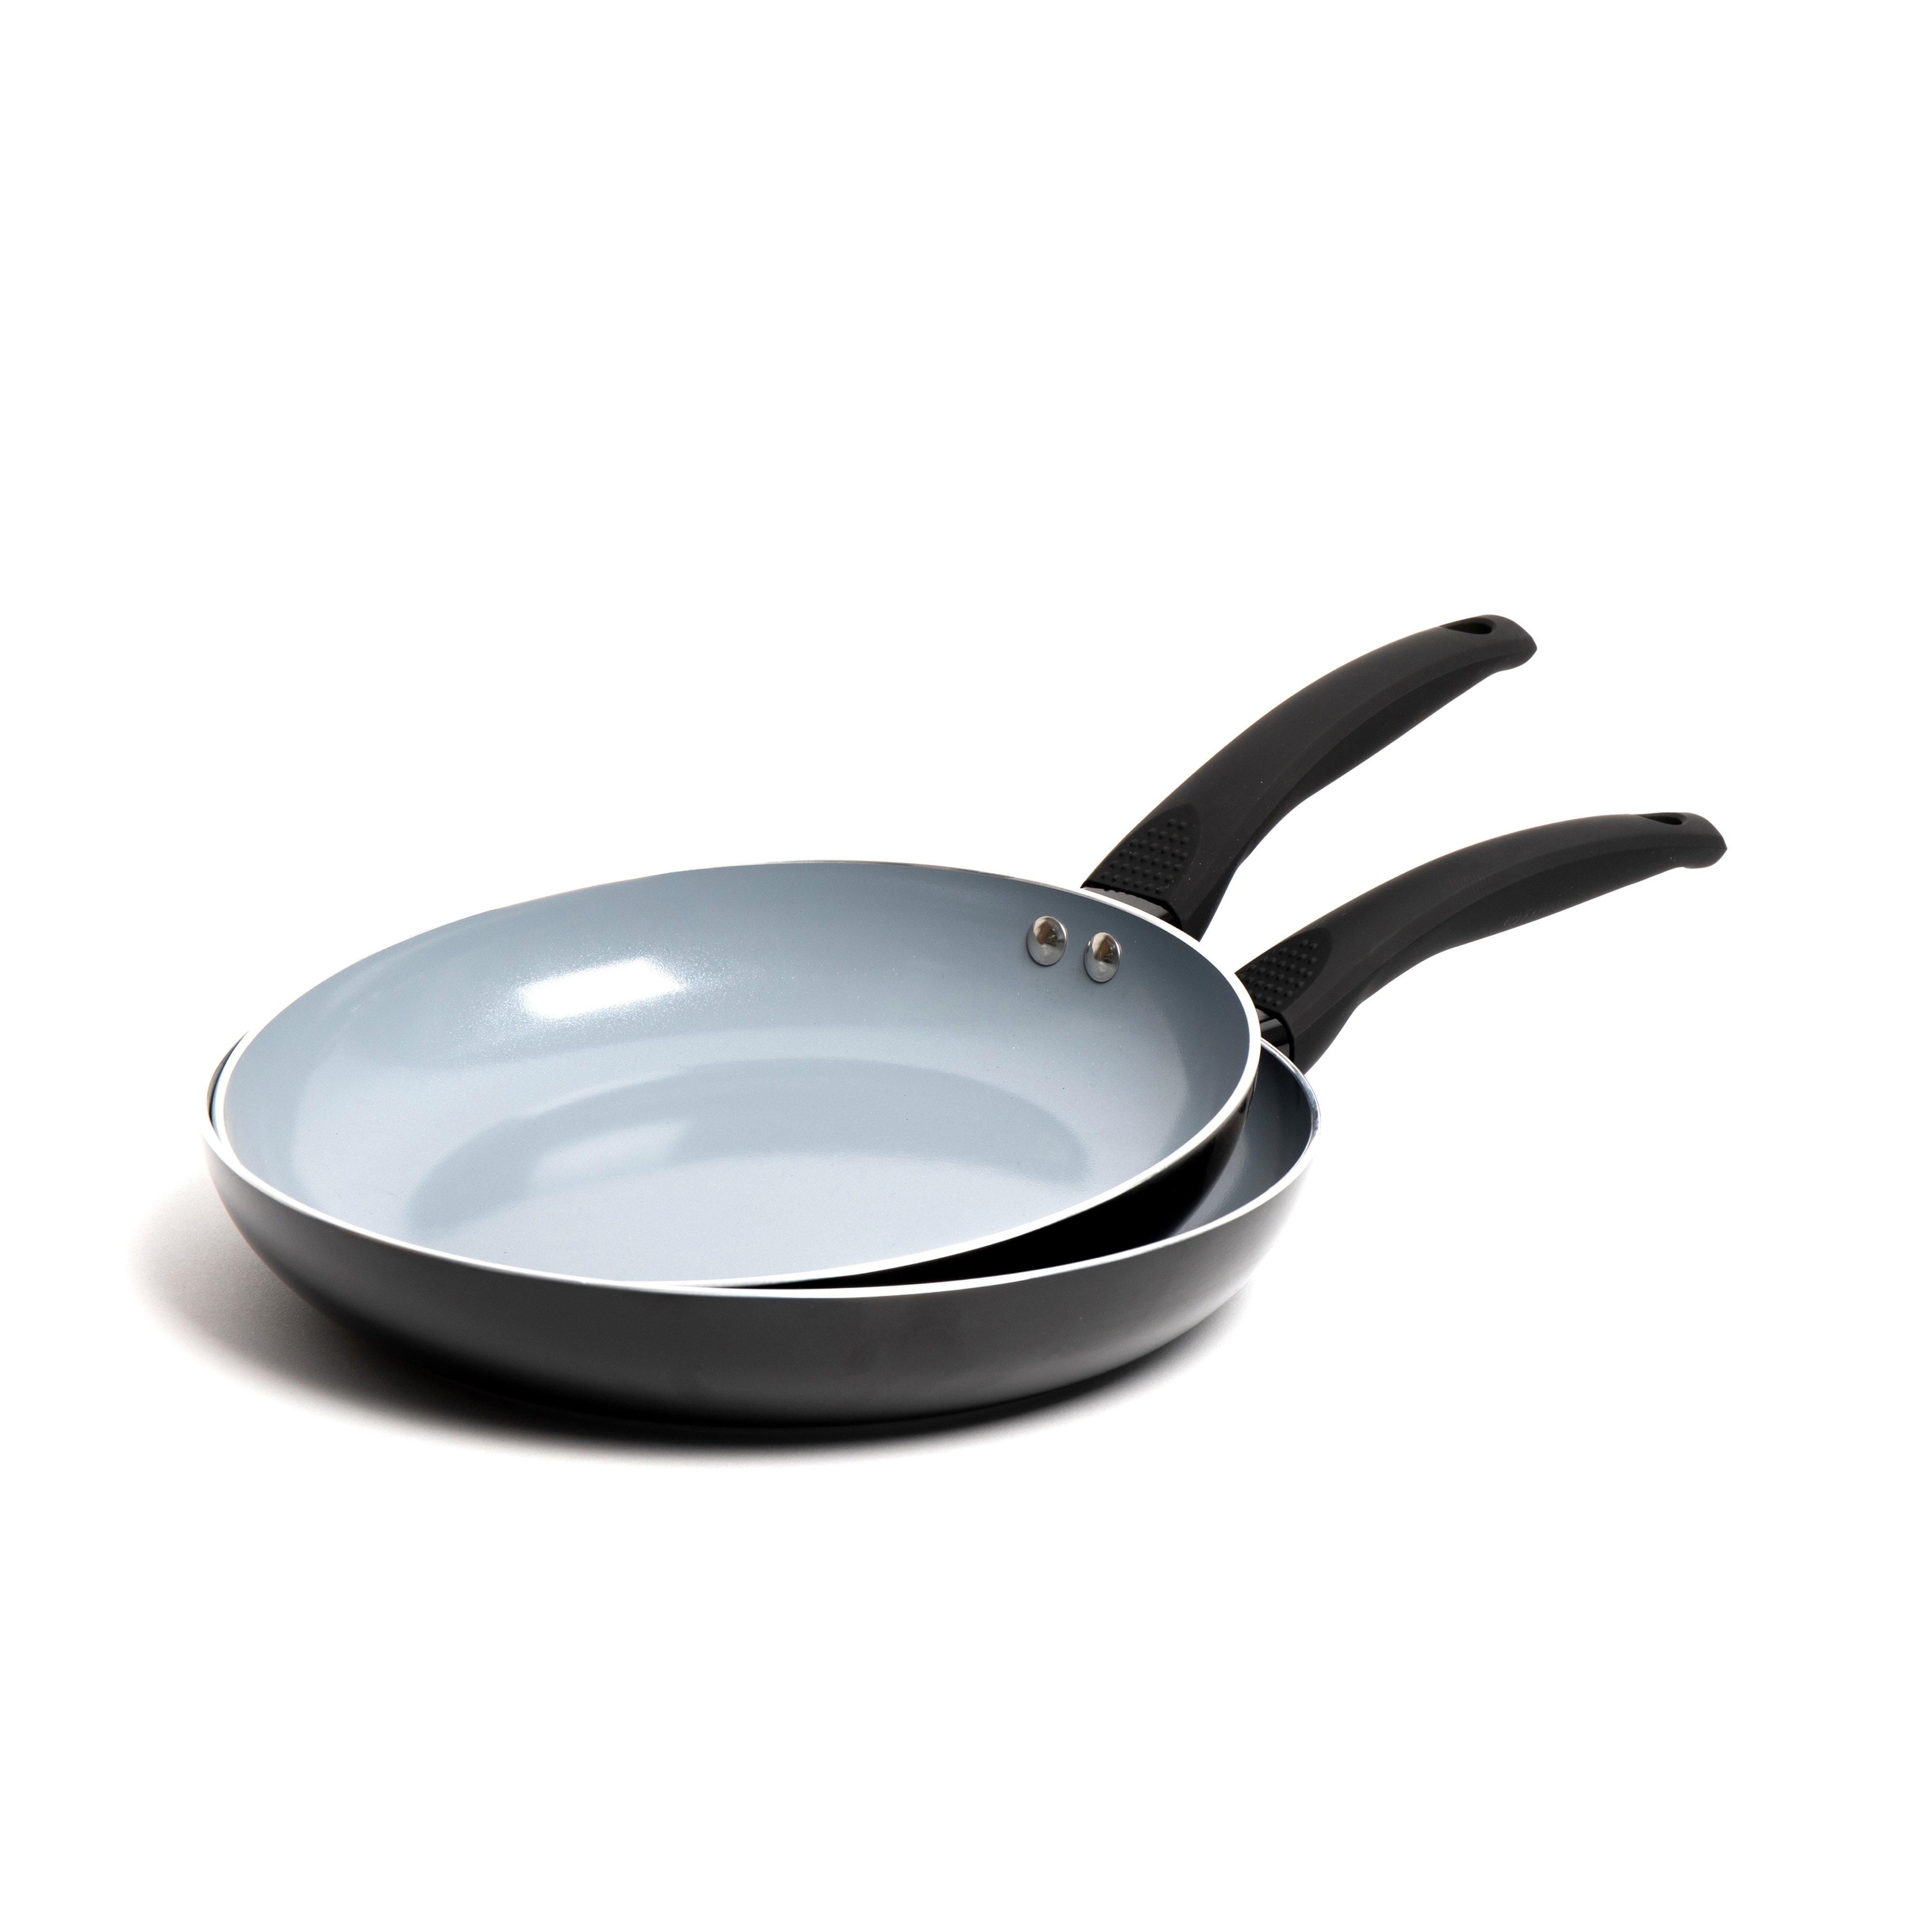 2pc Ceramic Non-Stick Eco Frying Pan Set with 2x Induction-Safe Frying Pans, 26cm and 28cm